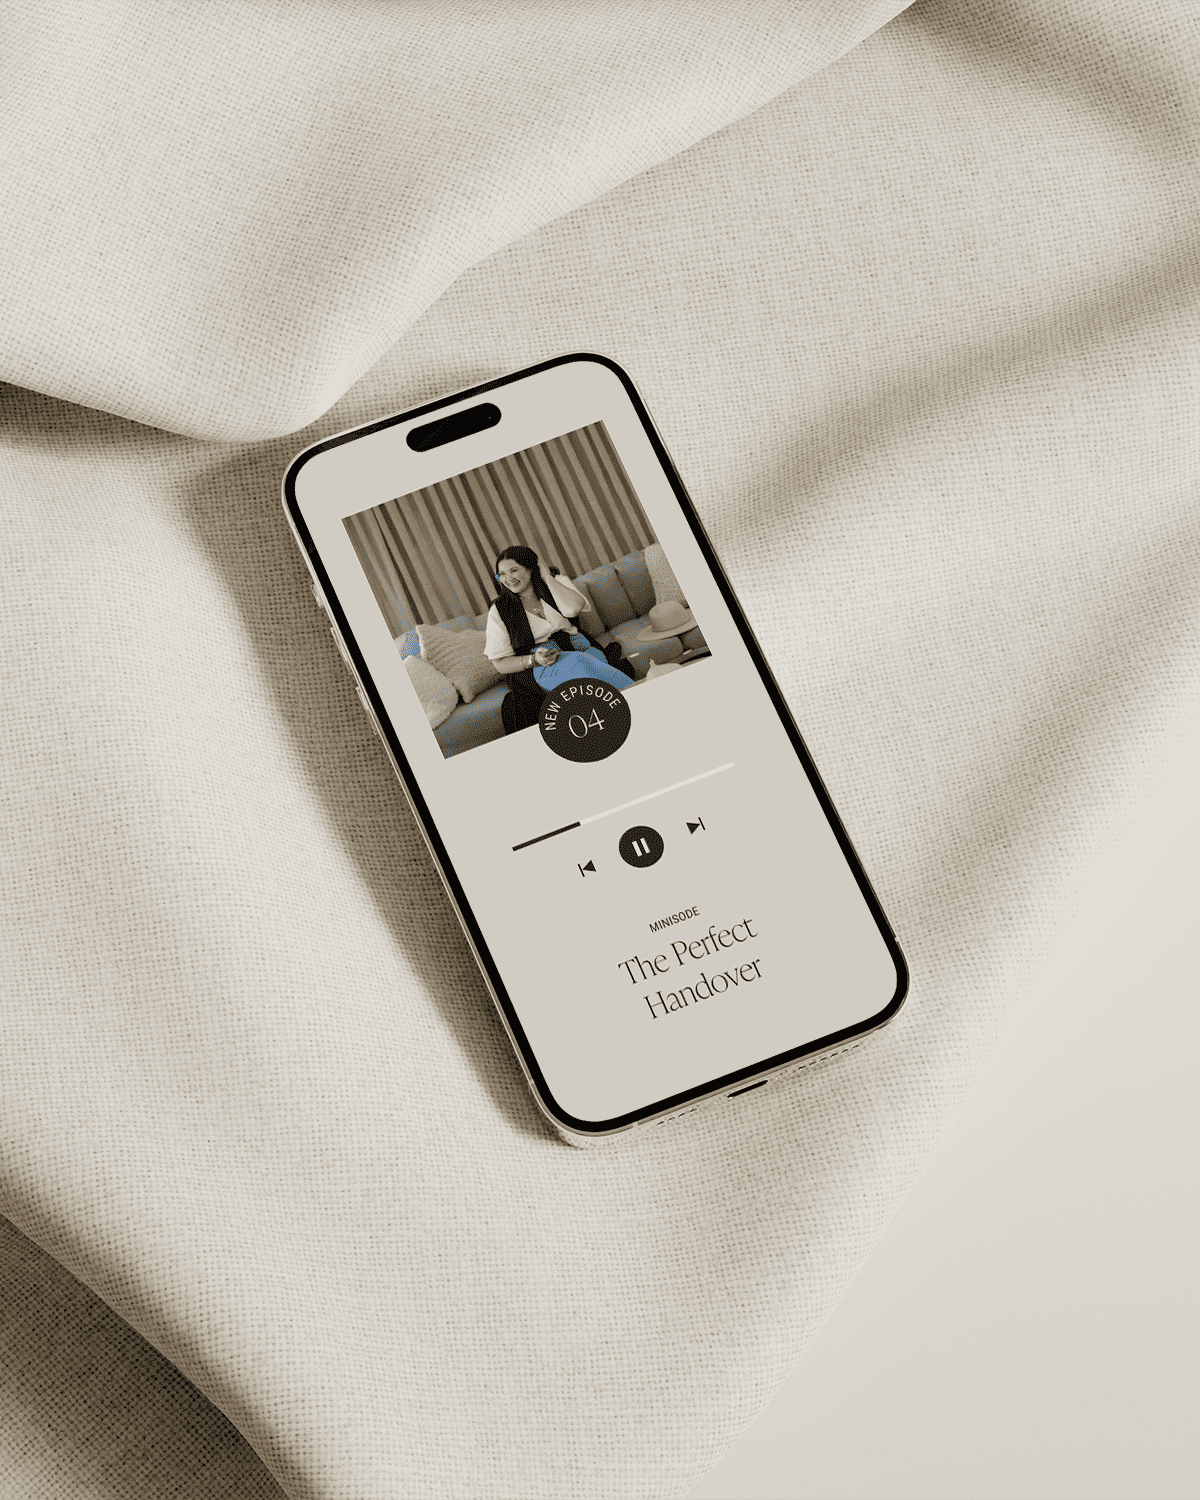 A WordPress designer created a phone with a picture of a woman on it.